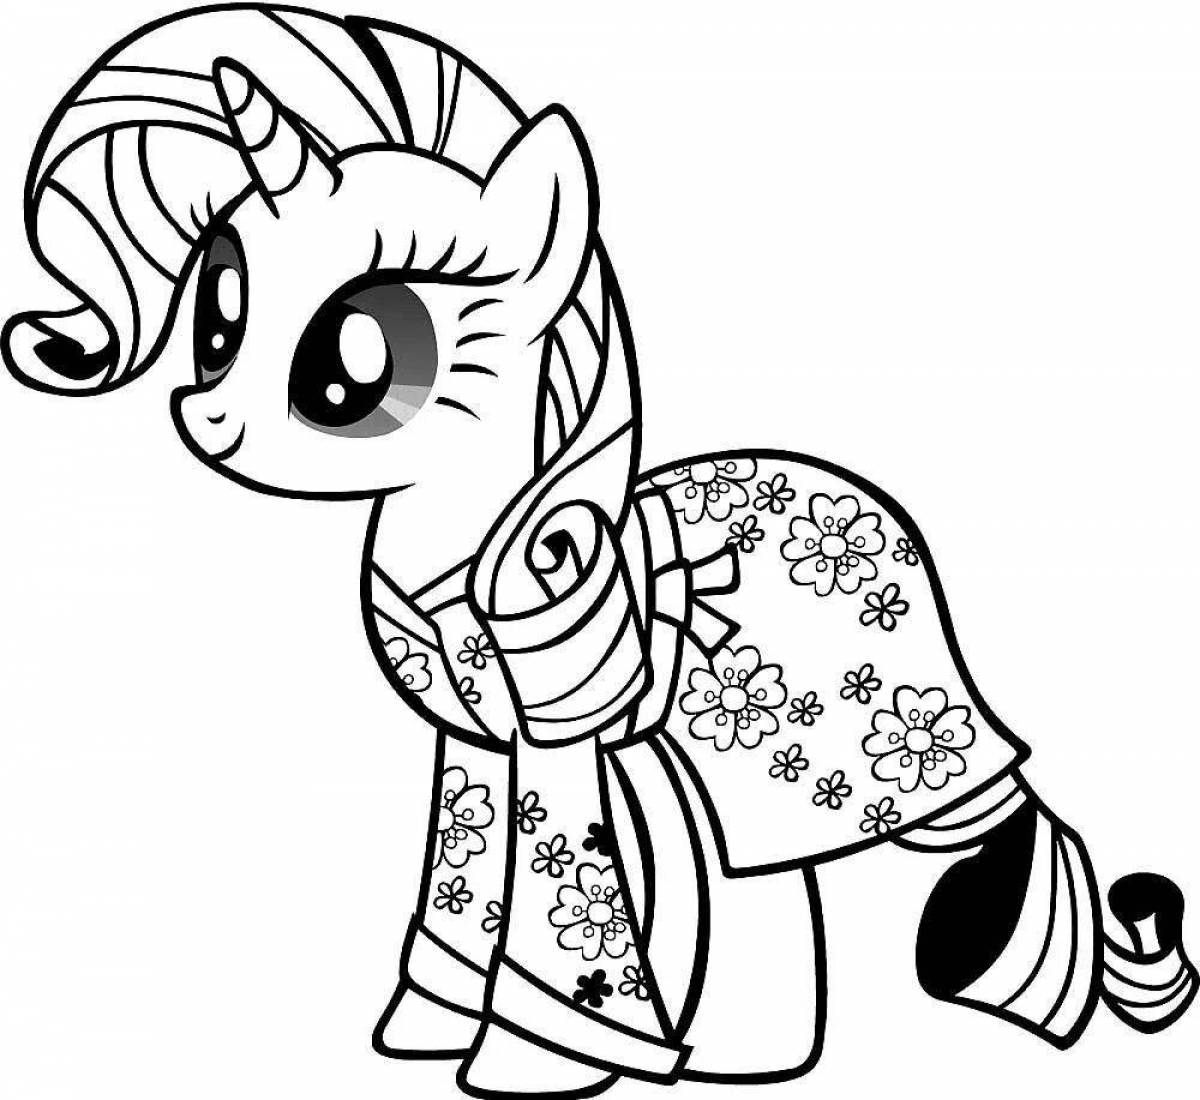 Playtime print pony coloring page